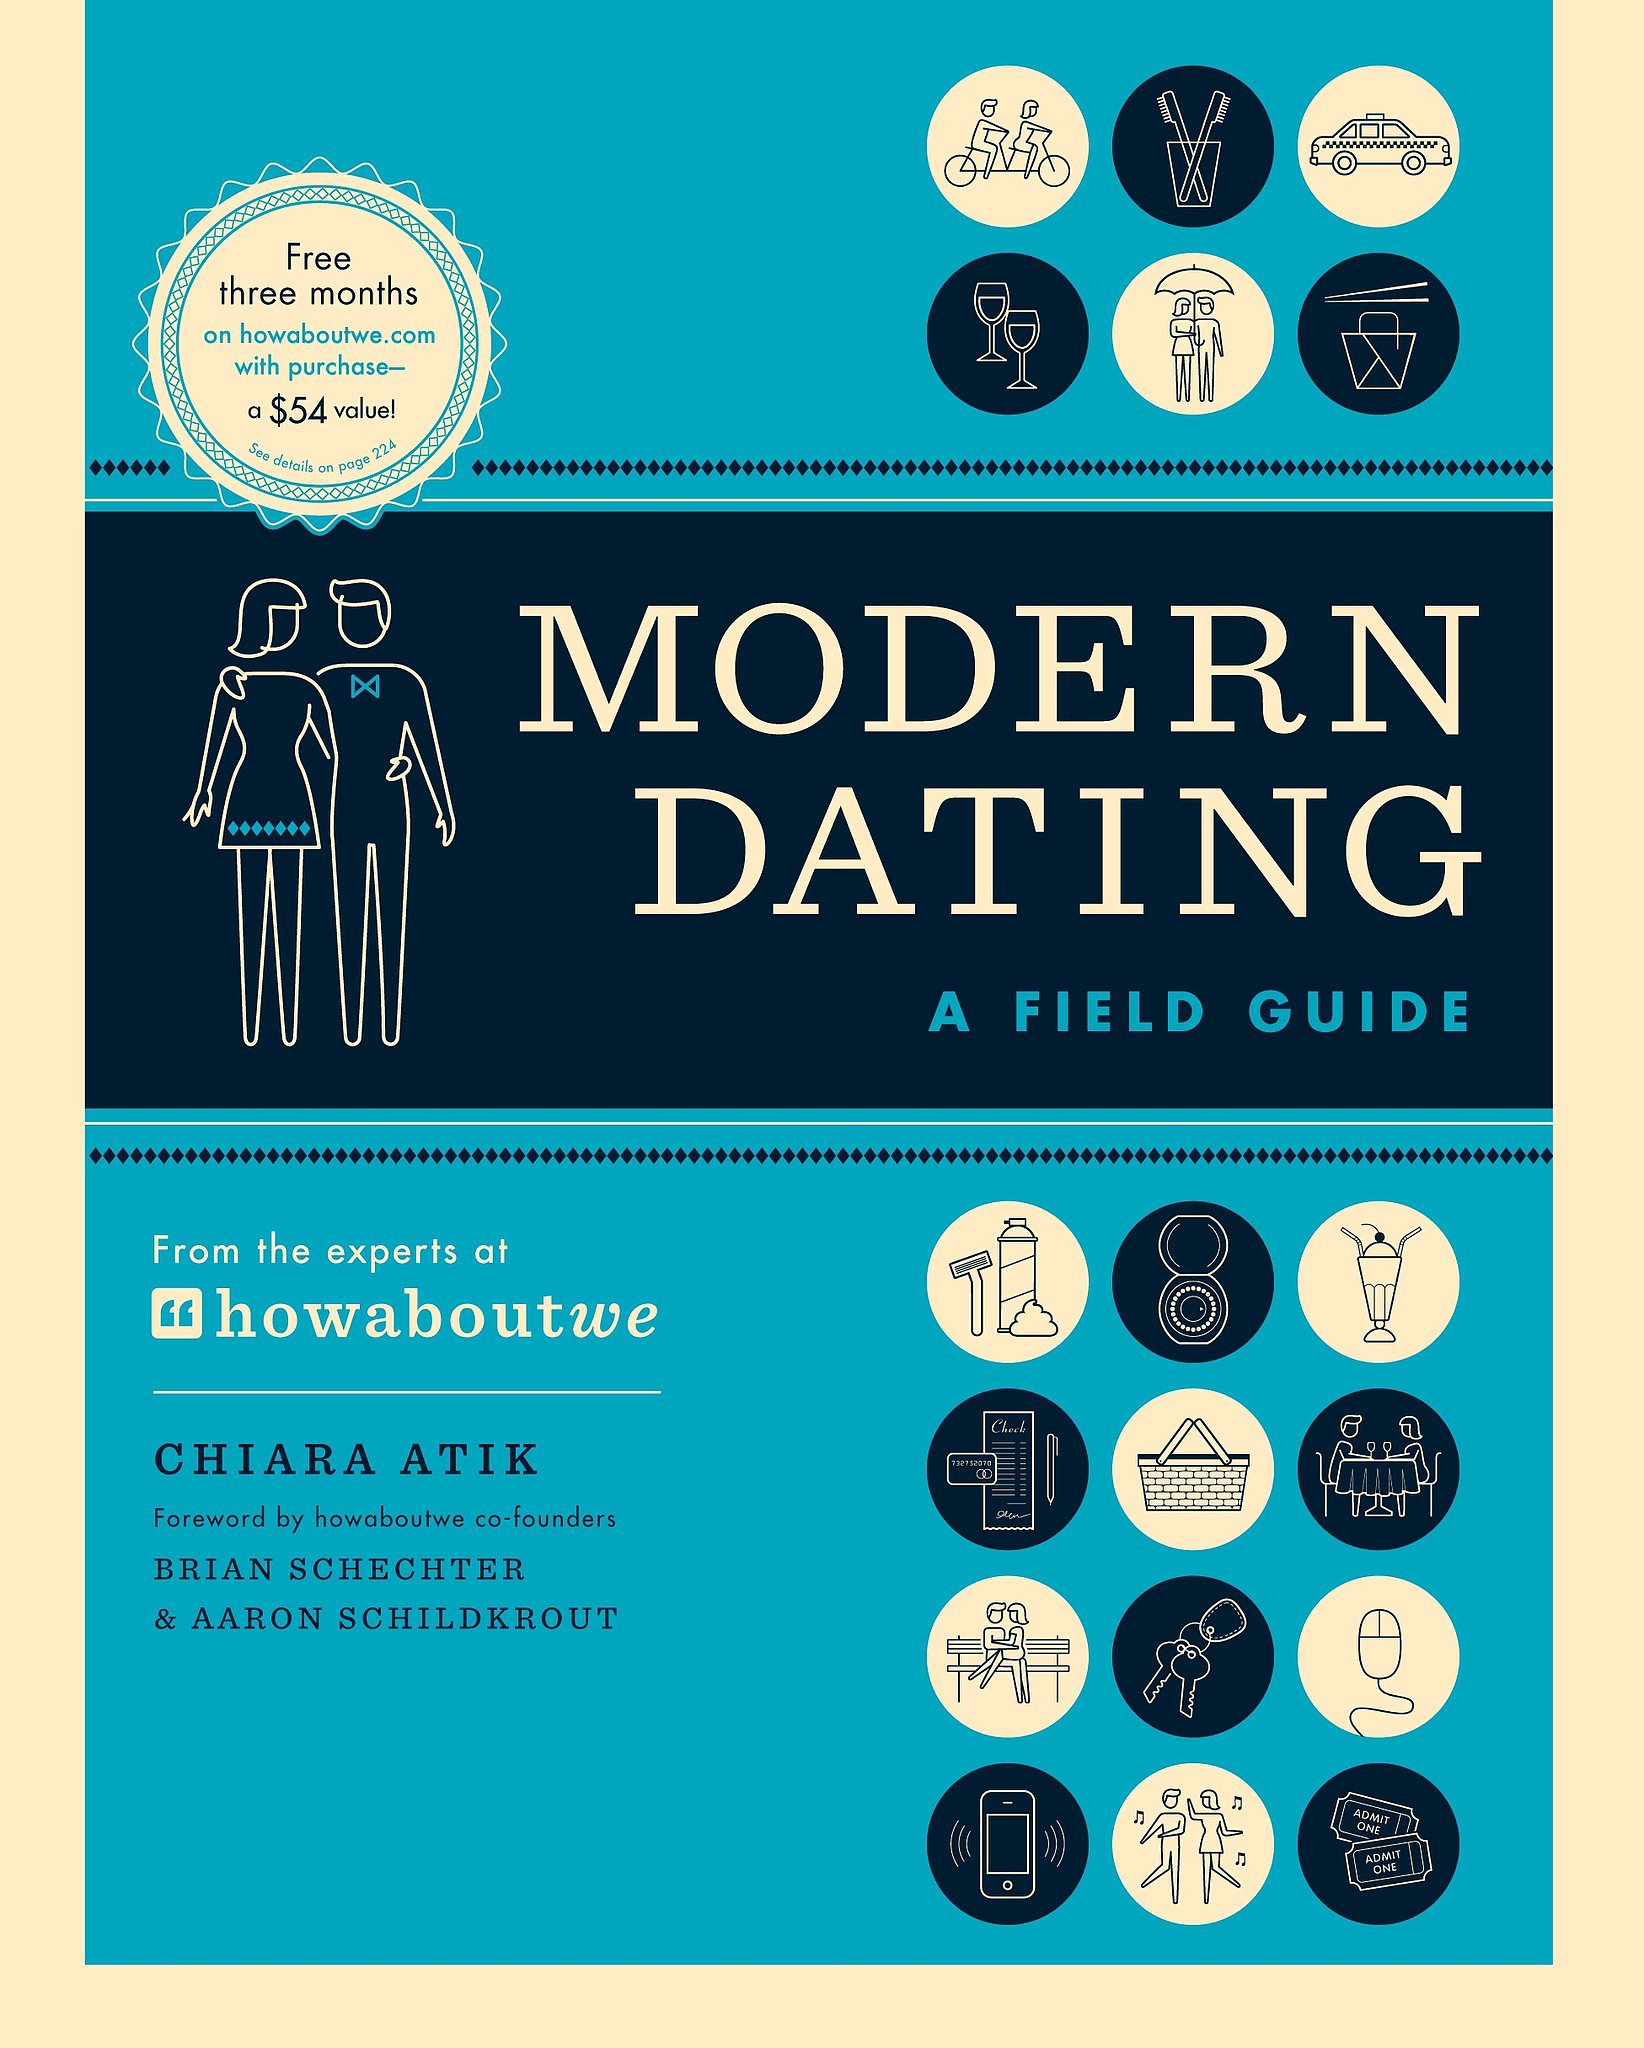 Modern Dating A Field Guide 21 Books to Give Your Friends or Lovers